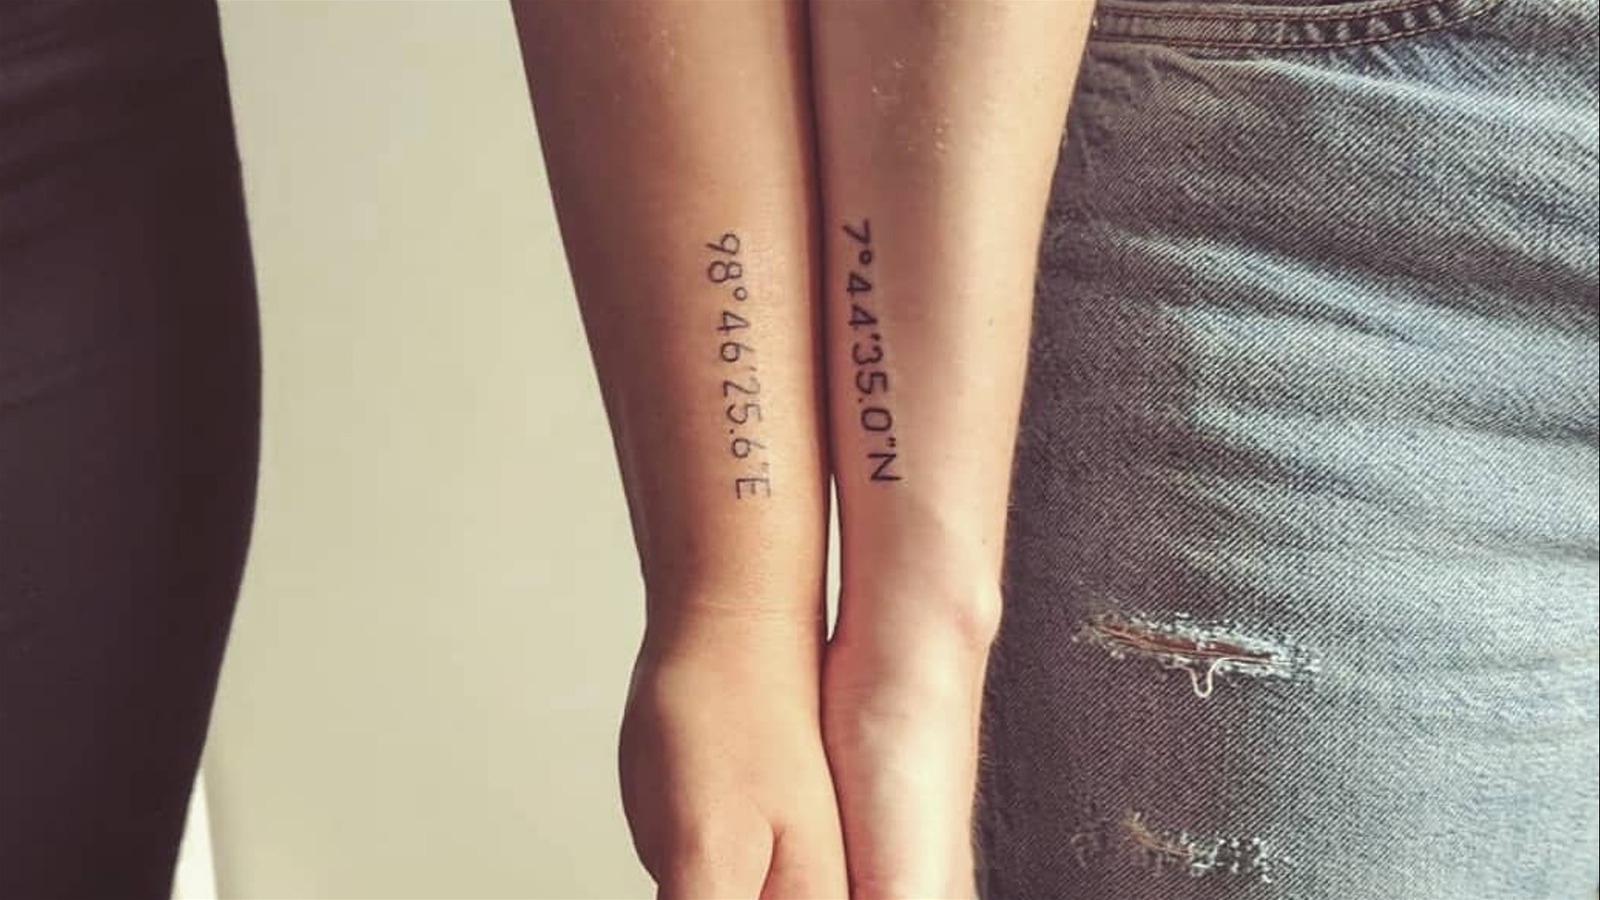 20 Coordinate Tattoos To Connect You To A Special Place